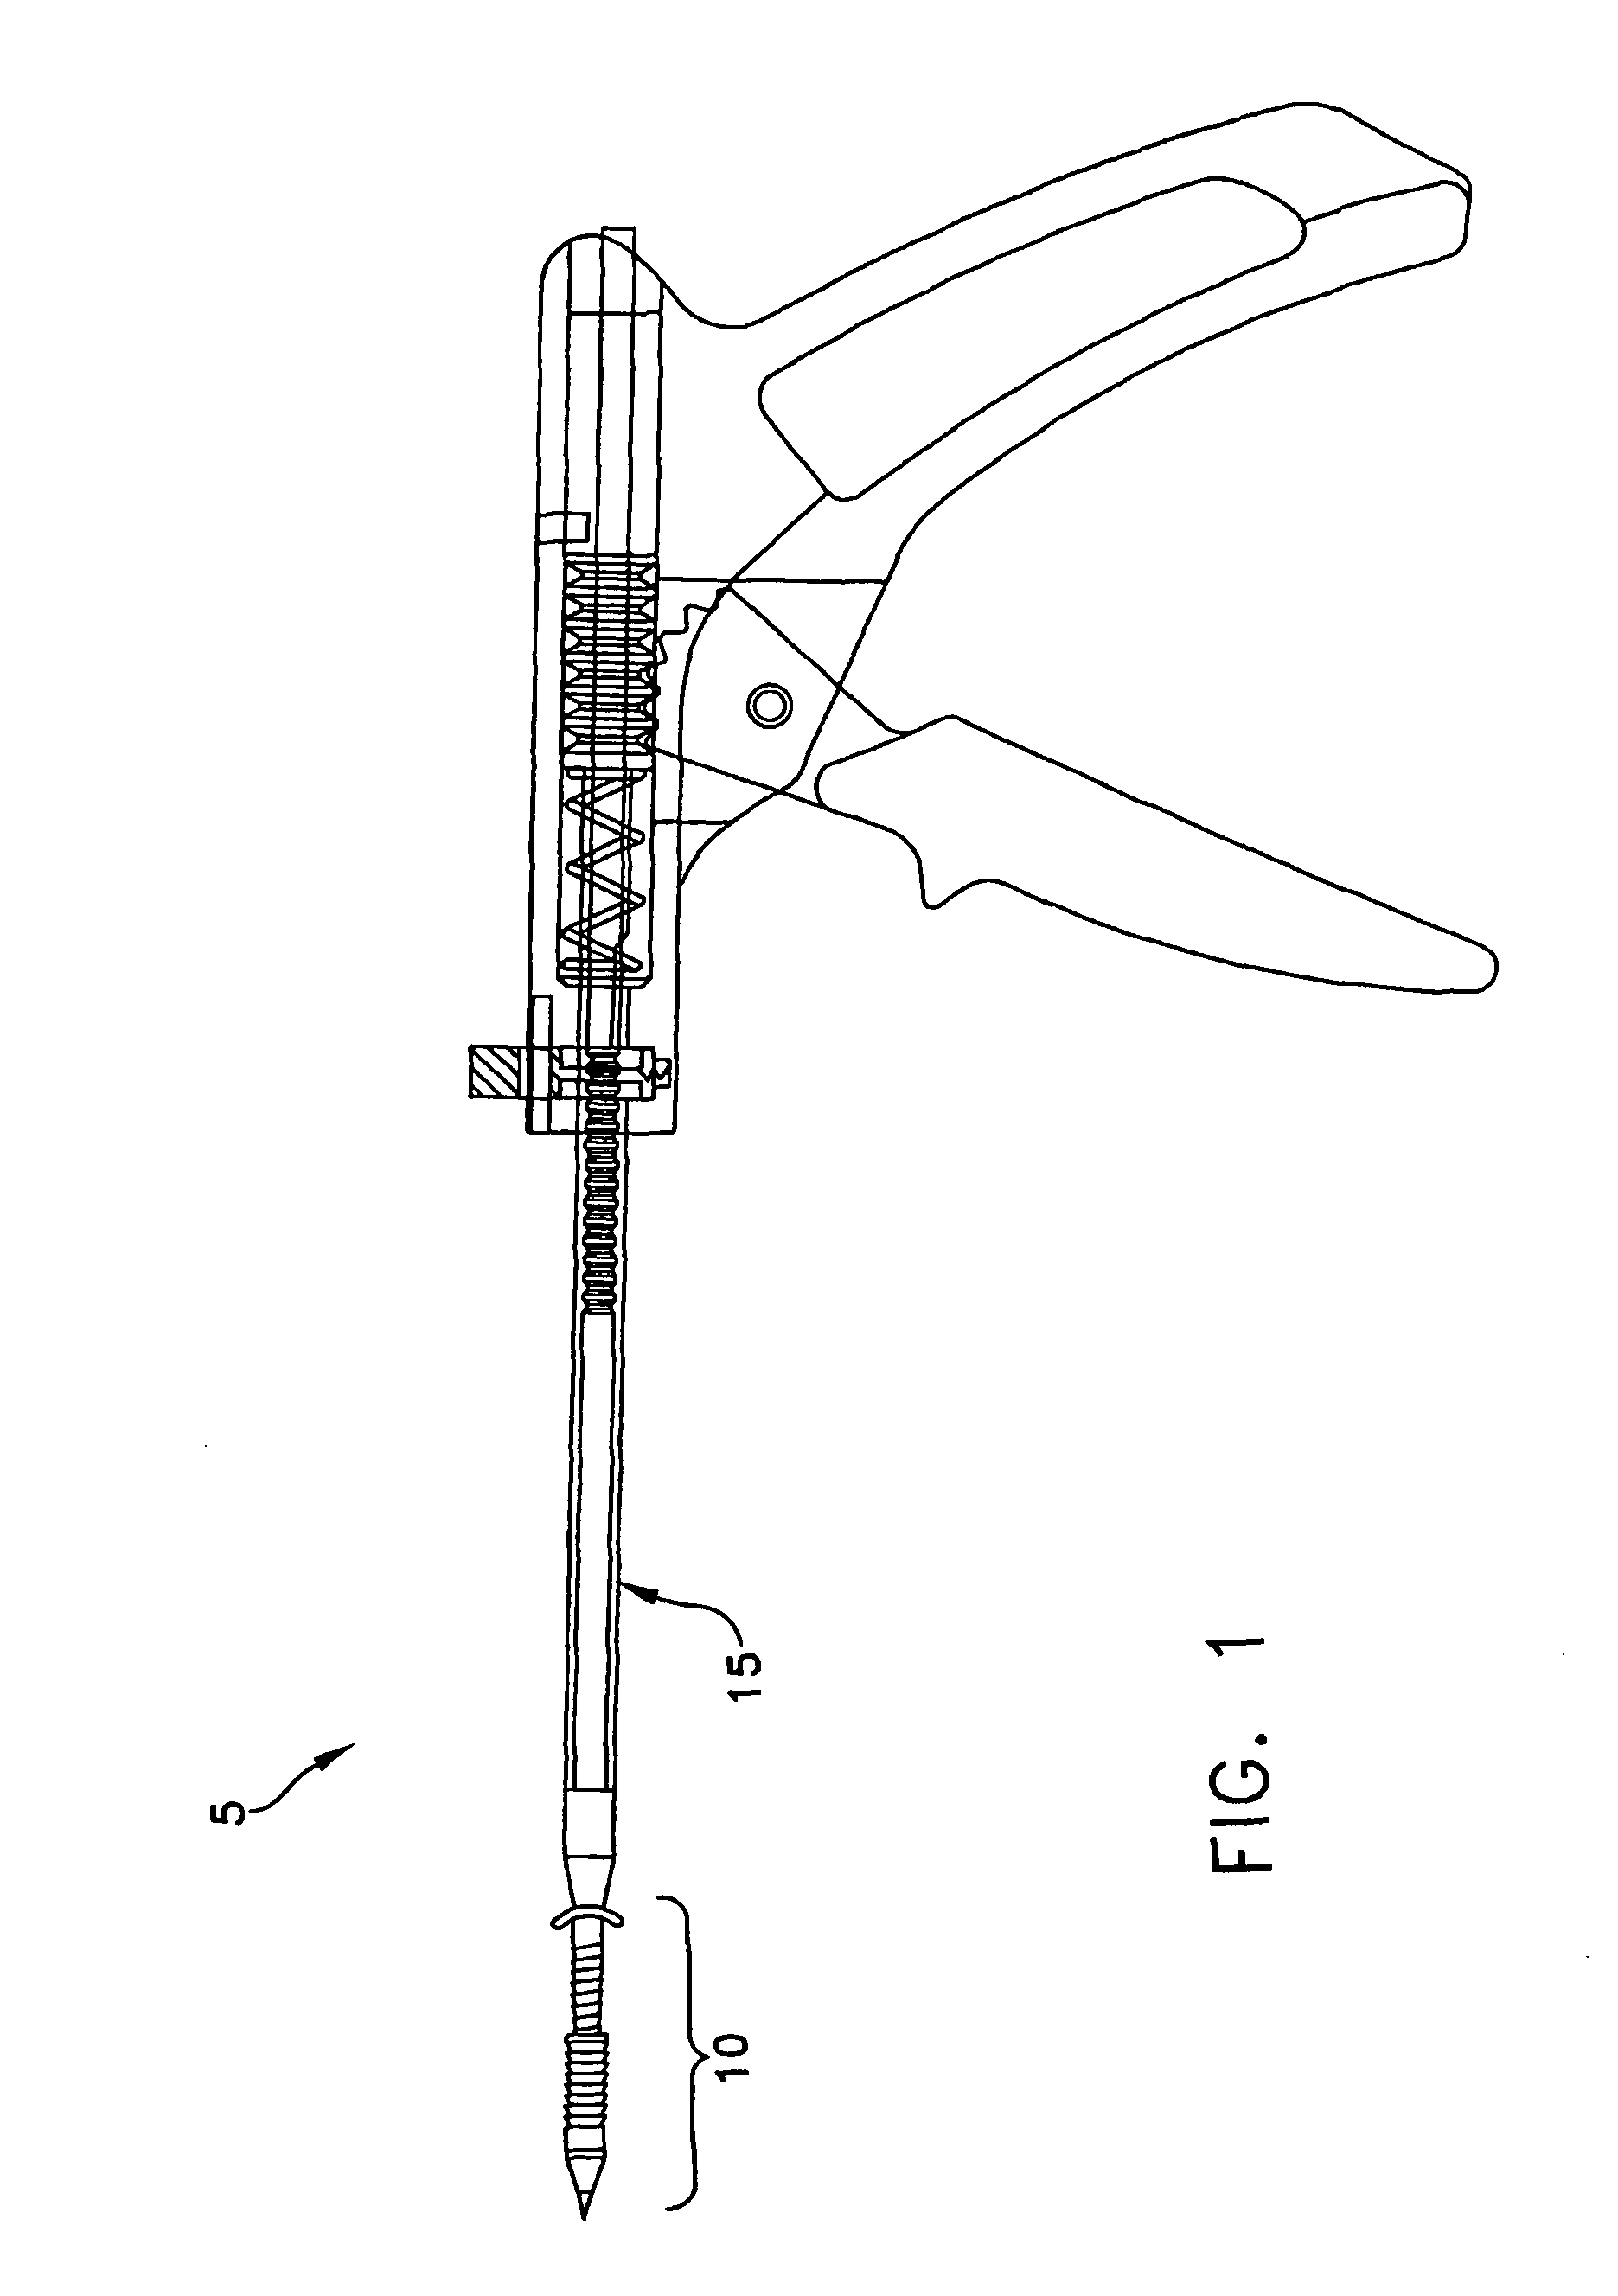 Apparatus and method for attaching soft tissue to bone